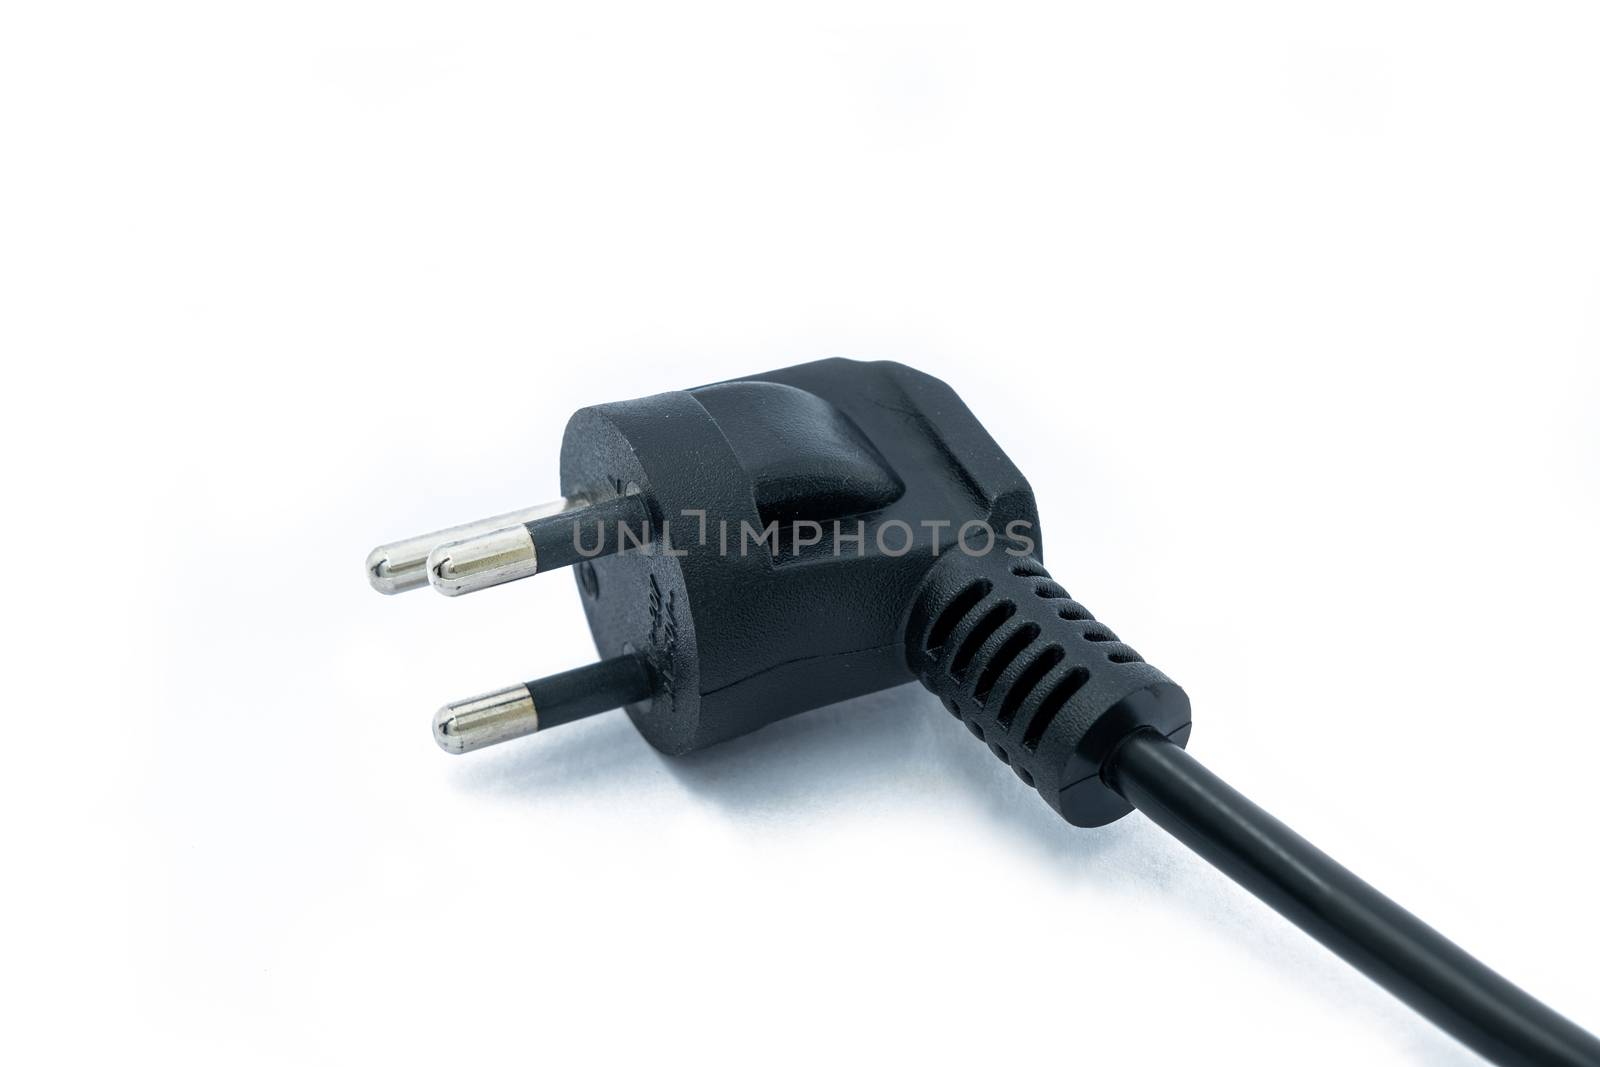 The Grounded electric cable cord ready to plug or unplug from power on white background